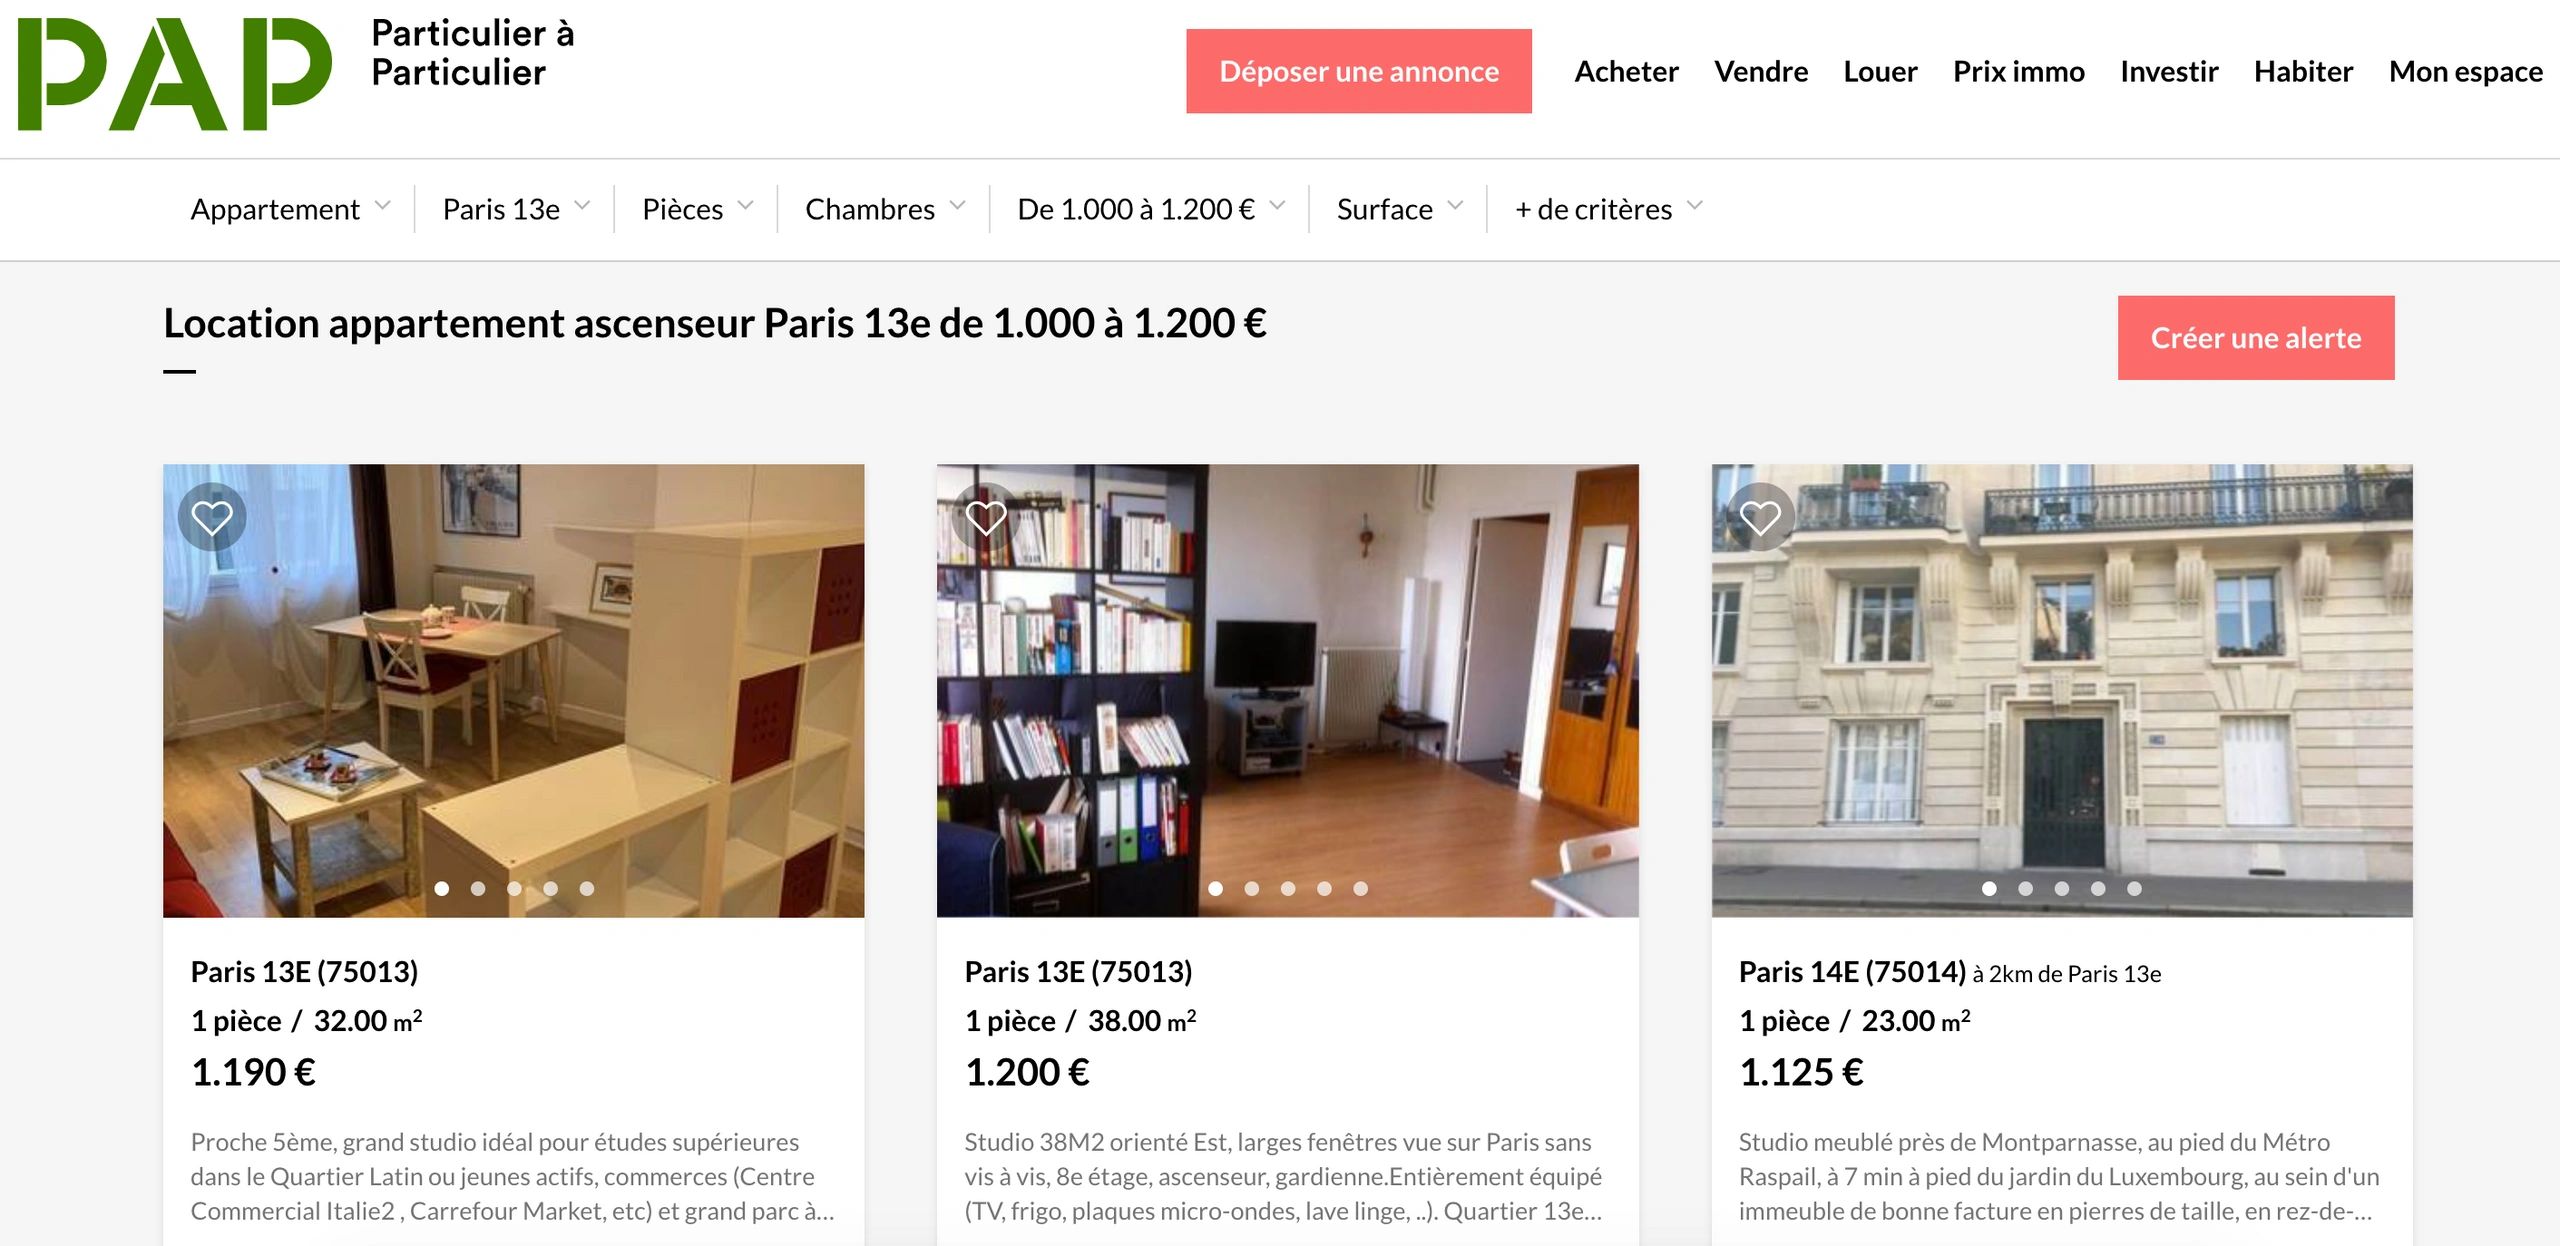 How to Find Your First Apartment Rental in Paris as a Foreigner